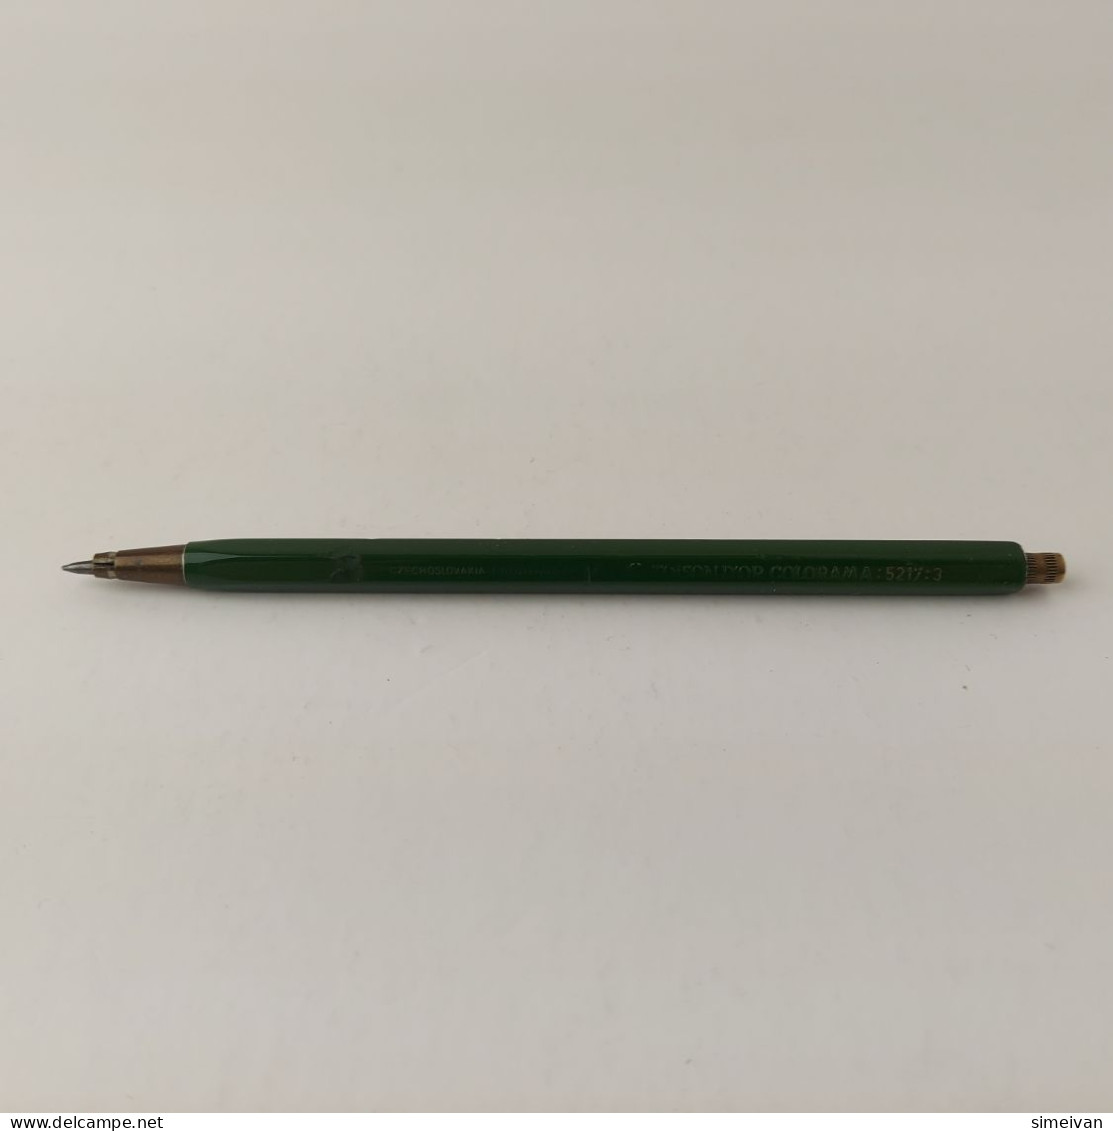 Vintage Mechanical Pencil TOISON D'OR COLORAMA 5217:3 Bohemia Works Green #5492 - Federn